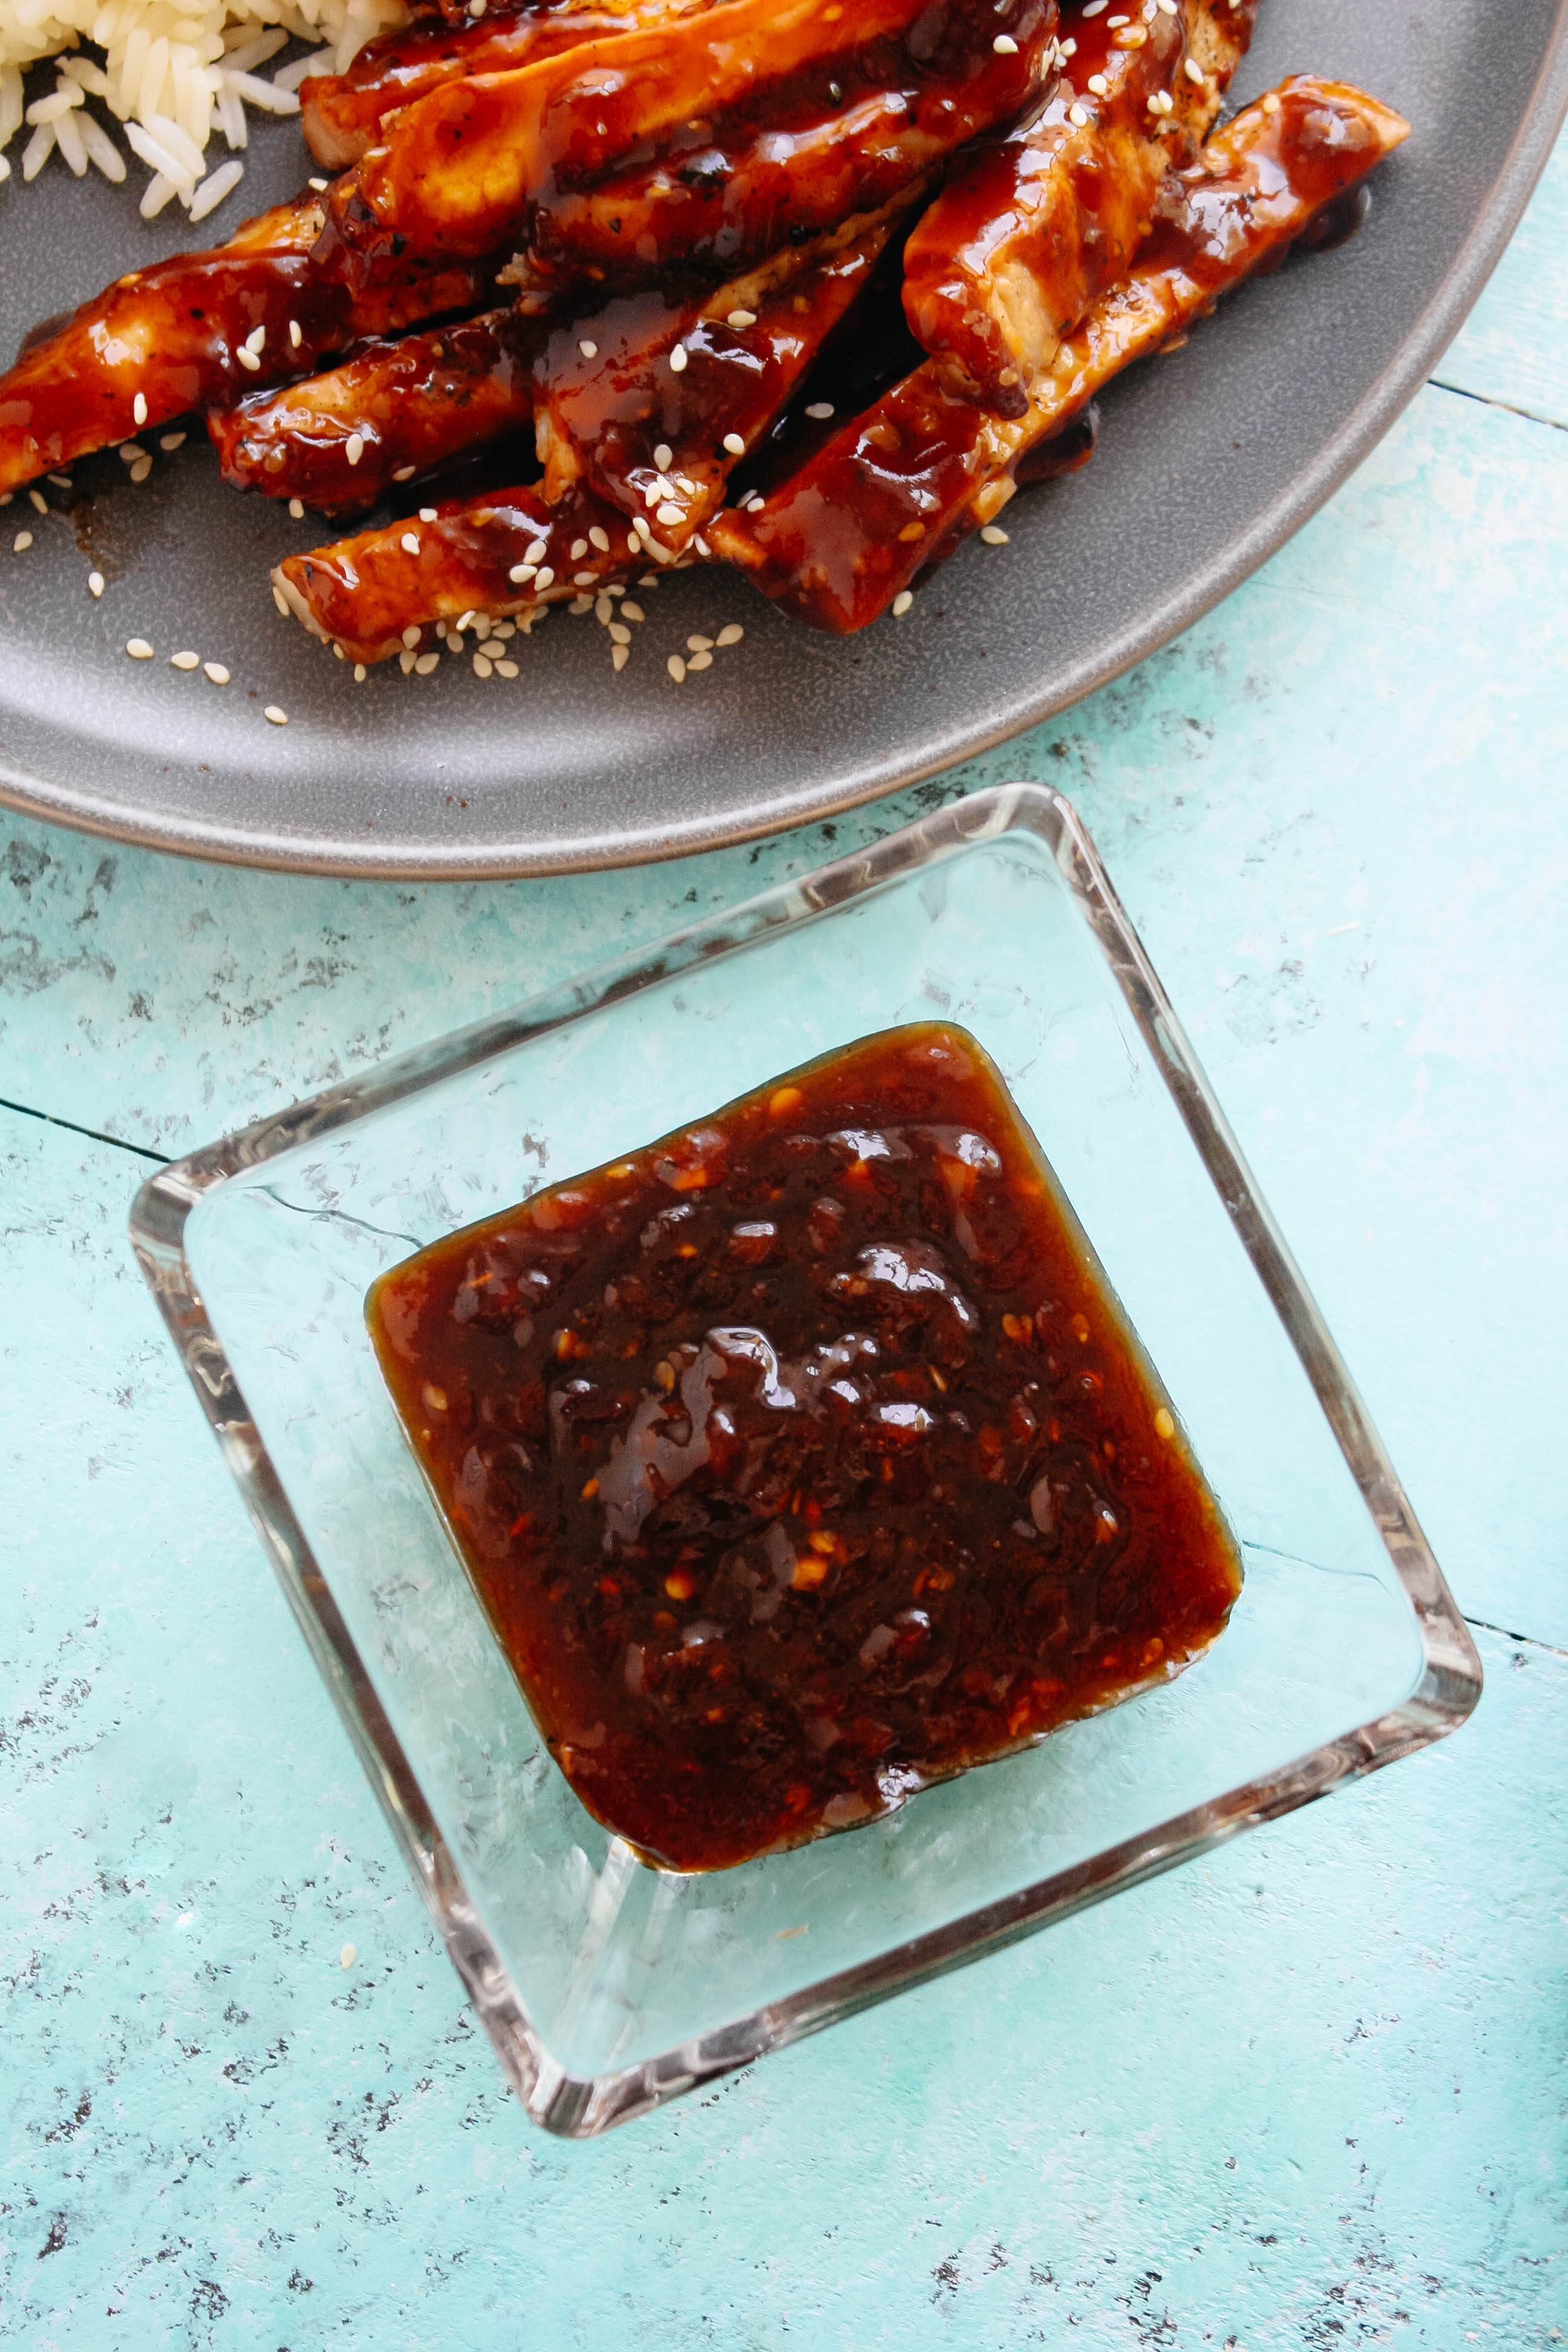 Grilled Boneless Pork Chops with Korean-Style BBQ Sauce is easy to make for your next meal. Grilled Boneless Pork Chops with Korean-Style BBQ Sauce includes a super-tasty sauce that makes the dish!